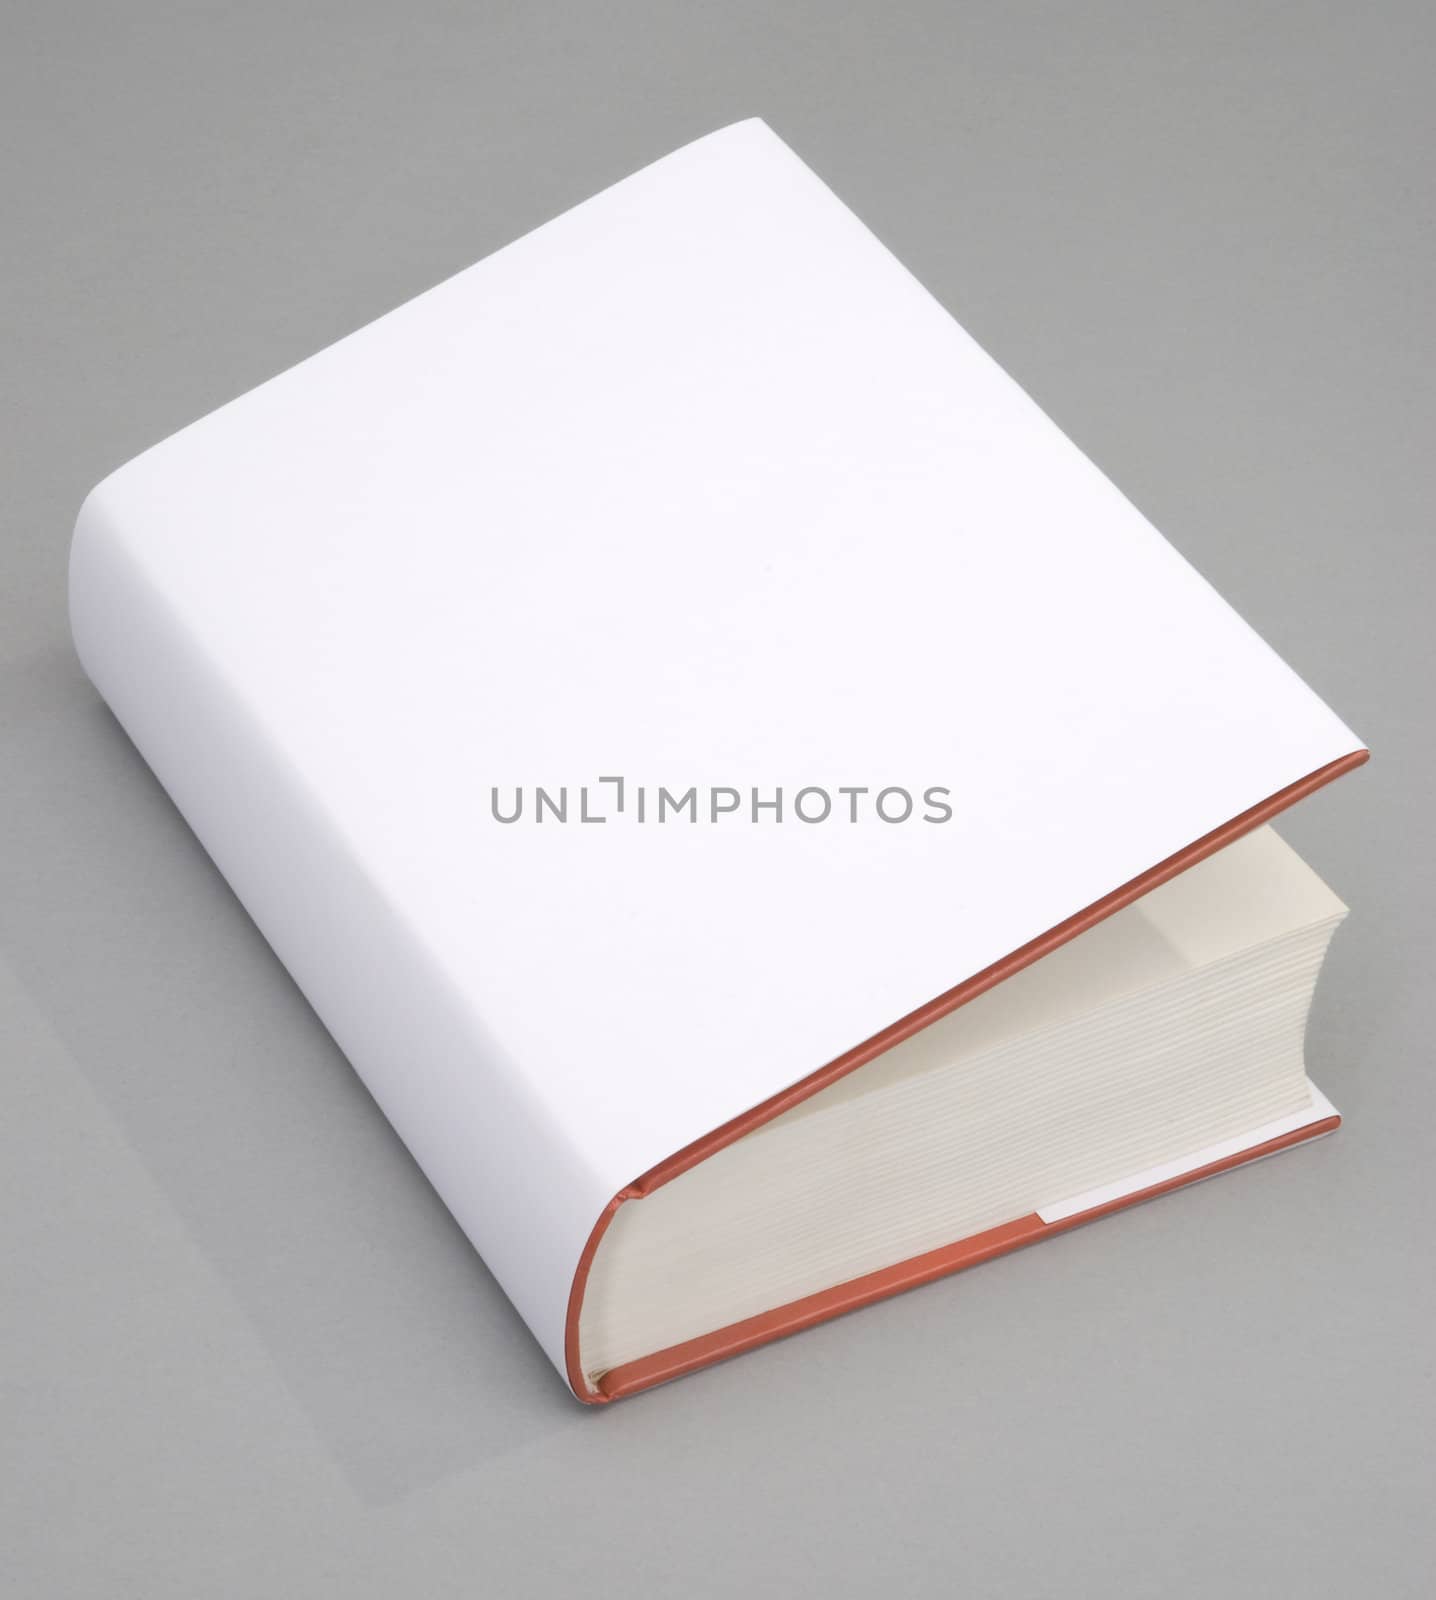 Blank book cover by hanusst